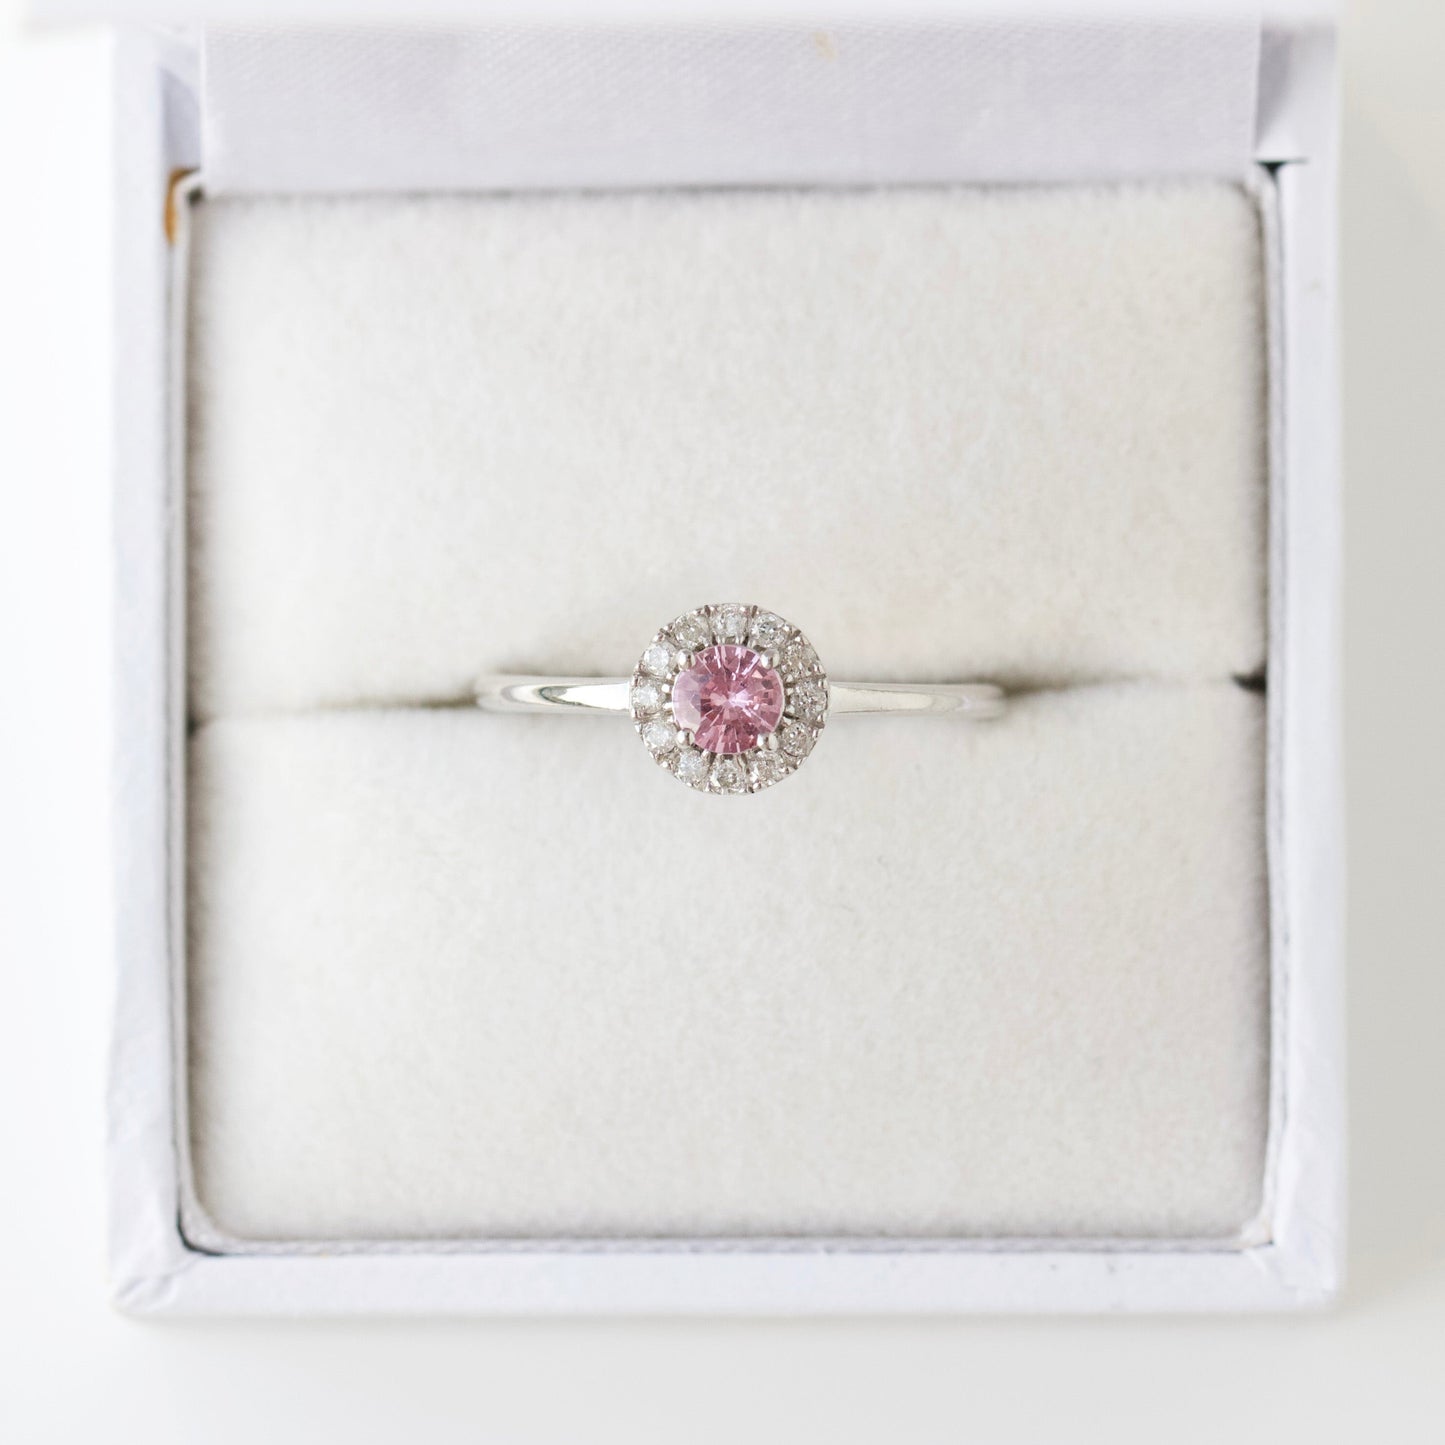 SAMPLE SALE- Pink Sapphire and Diamond Ring in 9k Solid White Gold- Size UK M